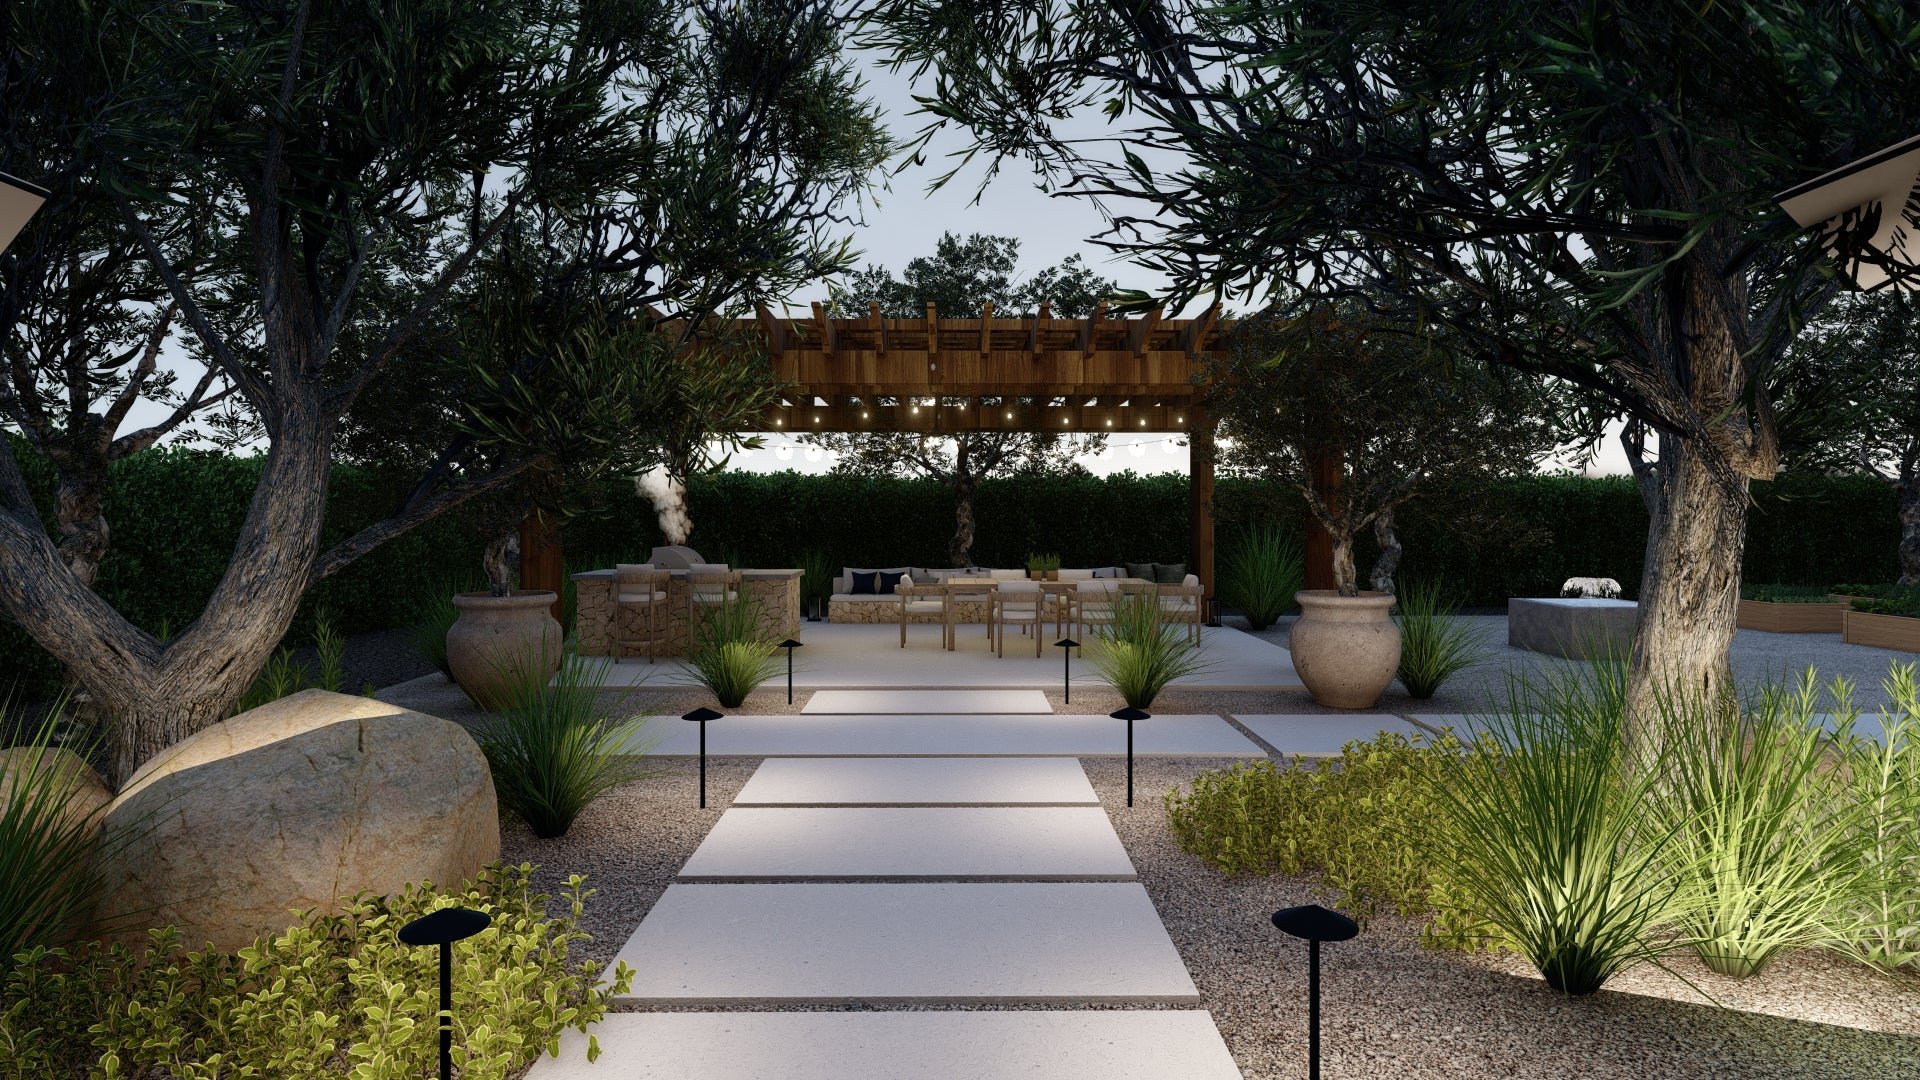 Pairs of low-profile path lights illuminate this broad path. While a light on one side alone would suffice, the client opted for facing pairs to emphasize symmetry.